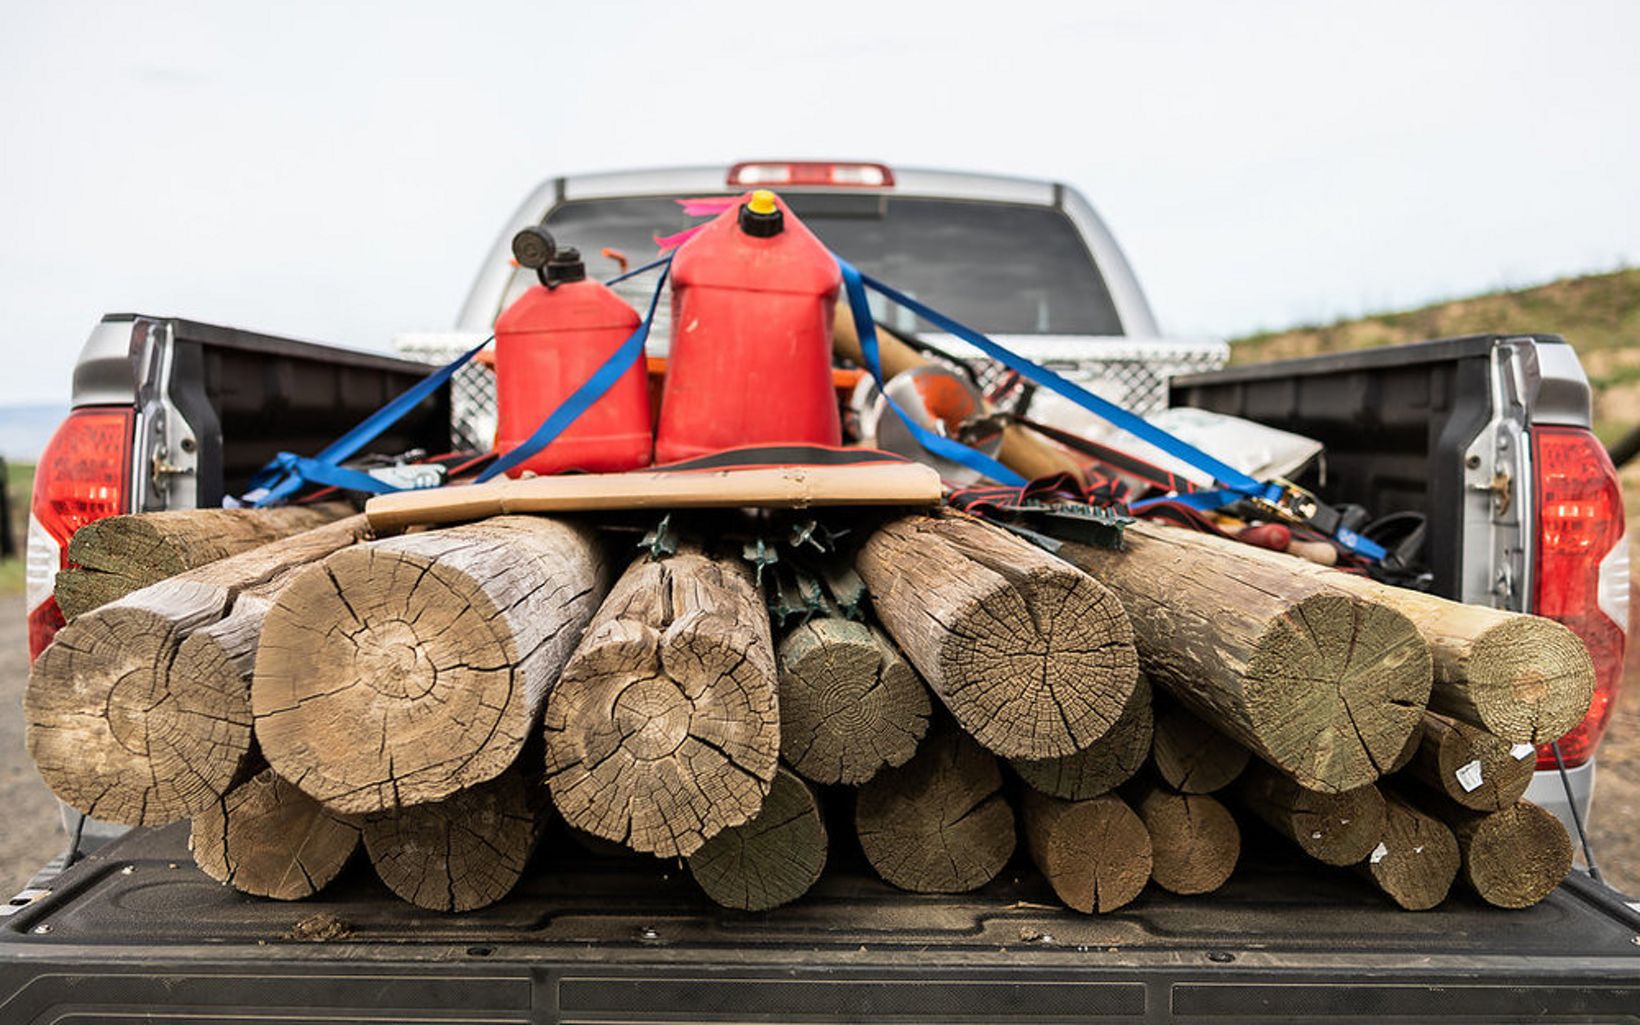 A view of the back of a truck full of supplies for a workday at Beezley Hills Preserve.